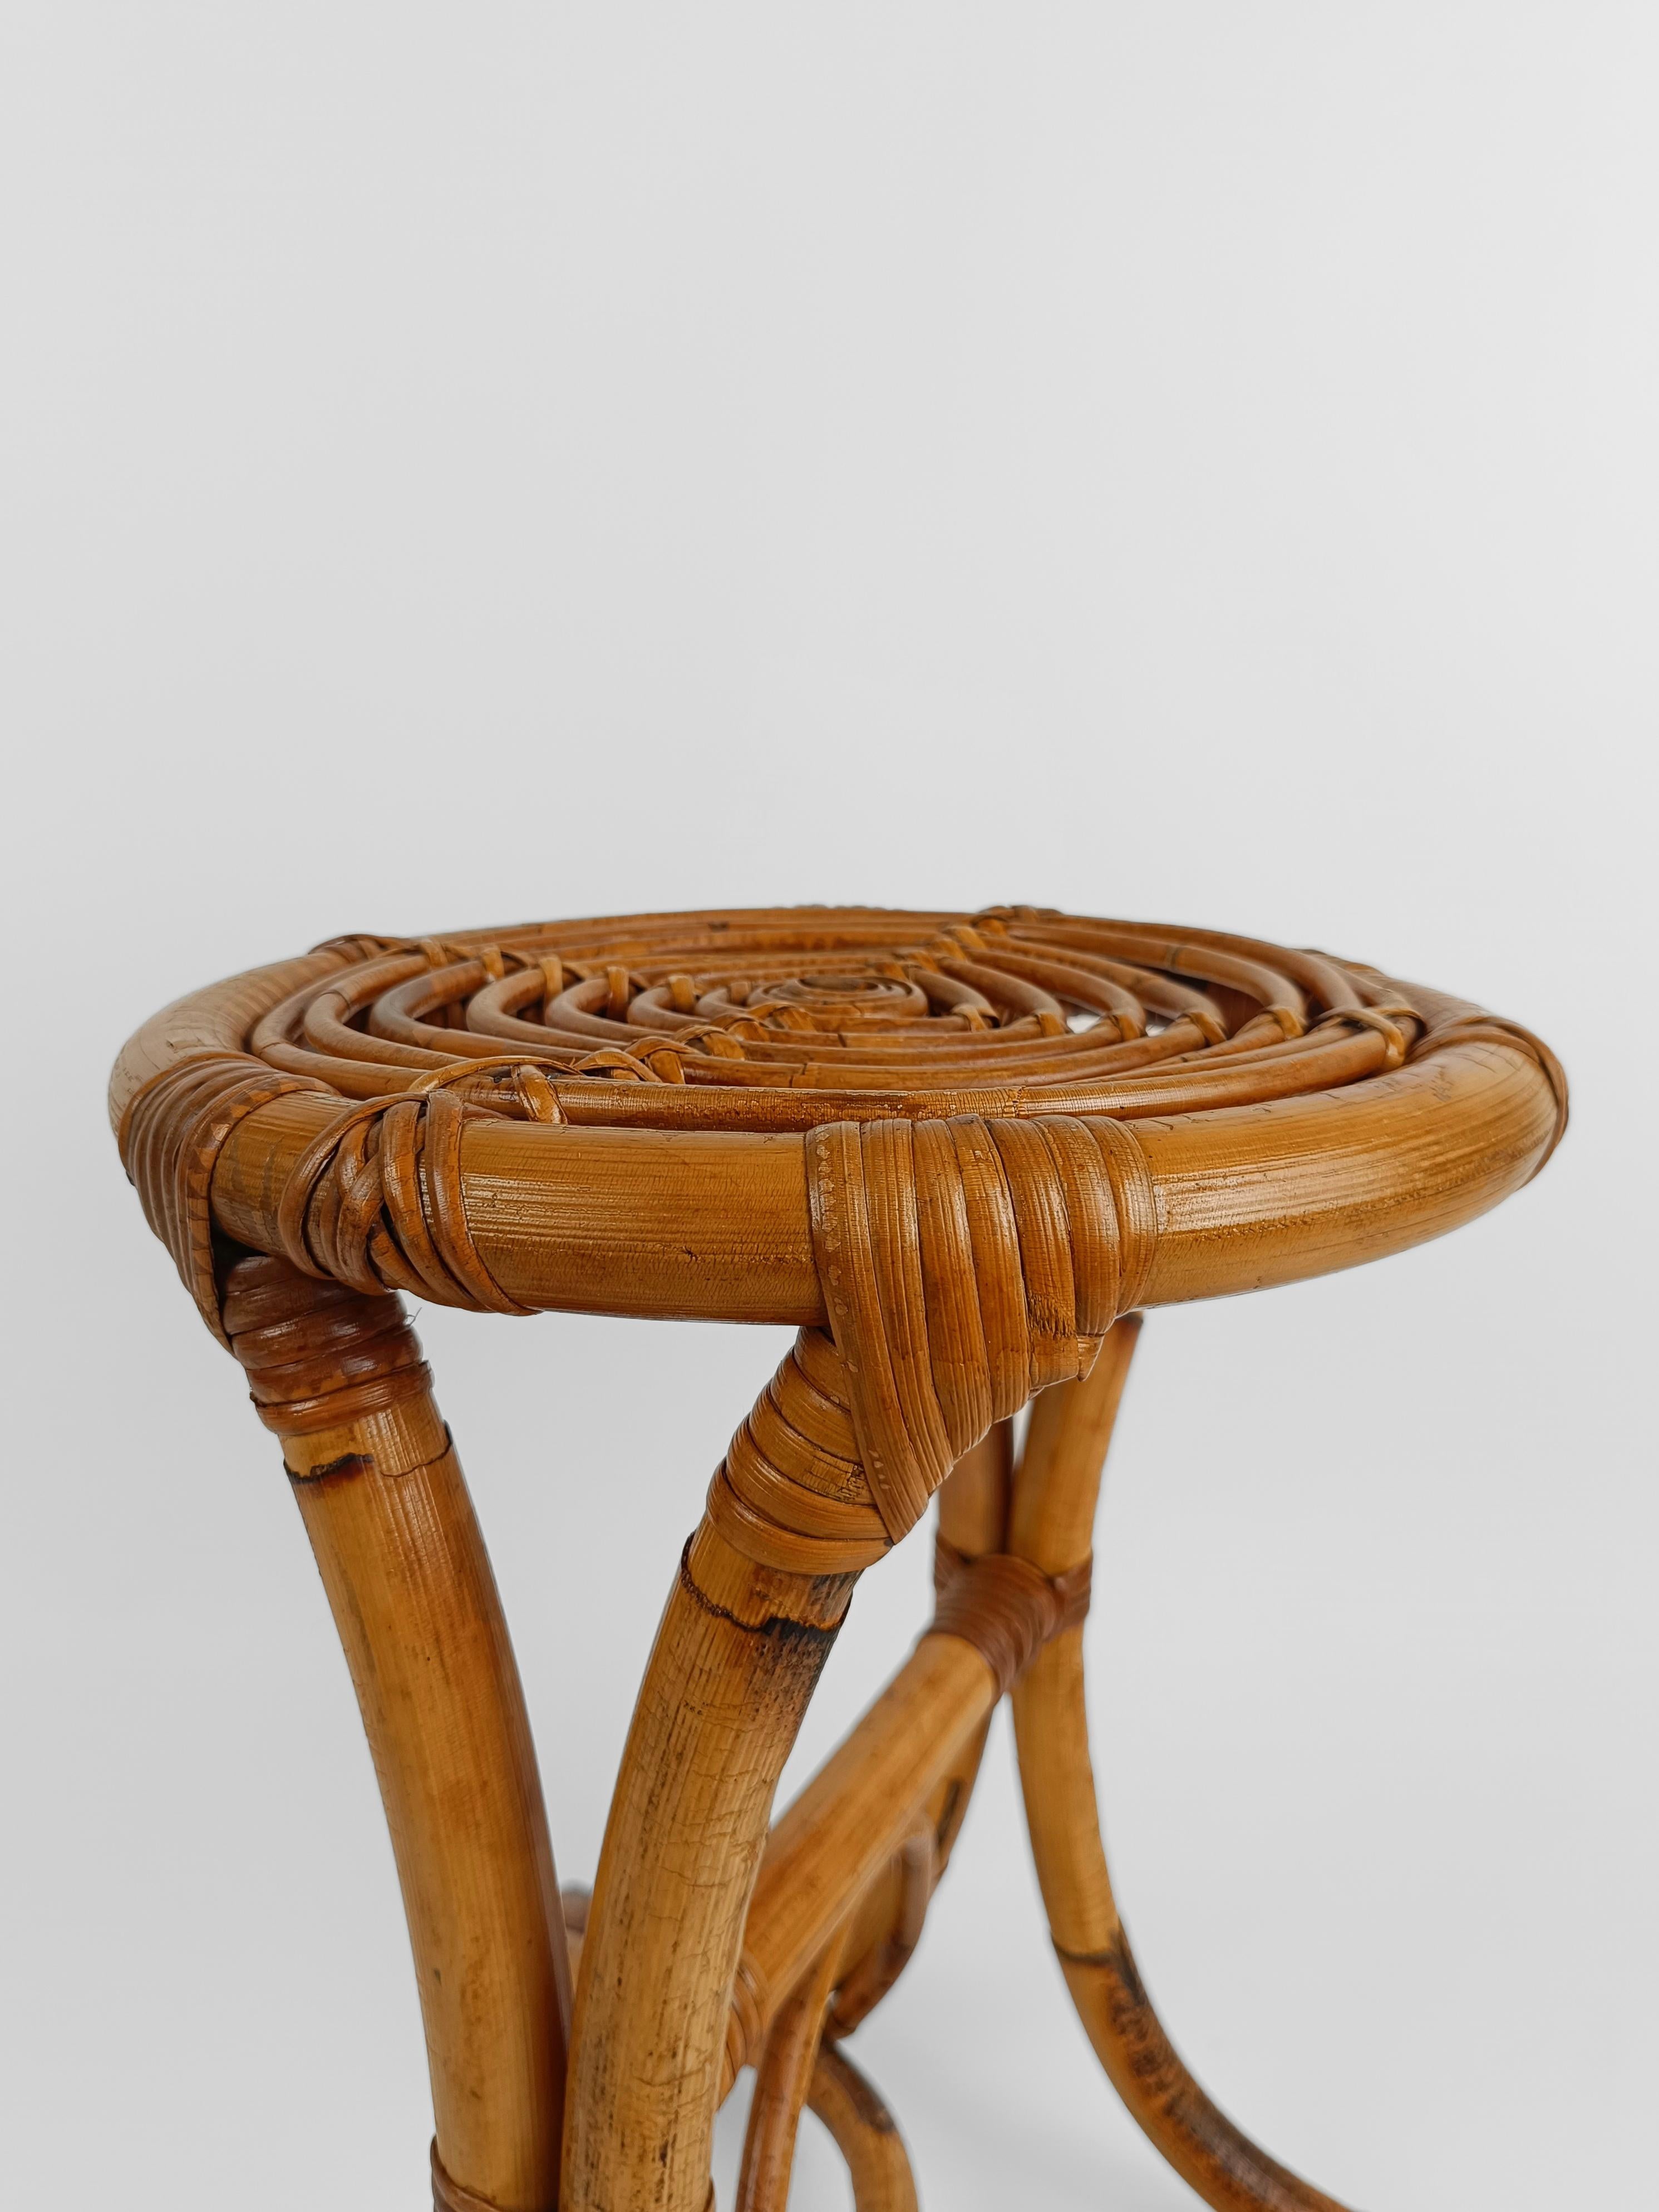 Italian Mid-Century Modern Bamboo Rattan and Cane Stool, 1960s  For Sale 8